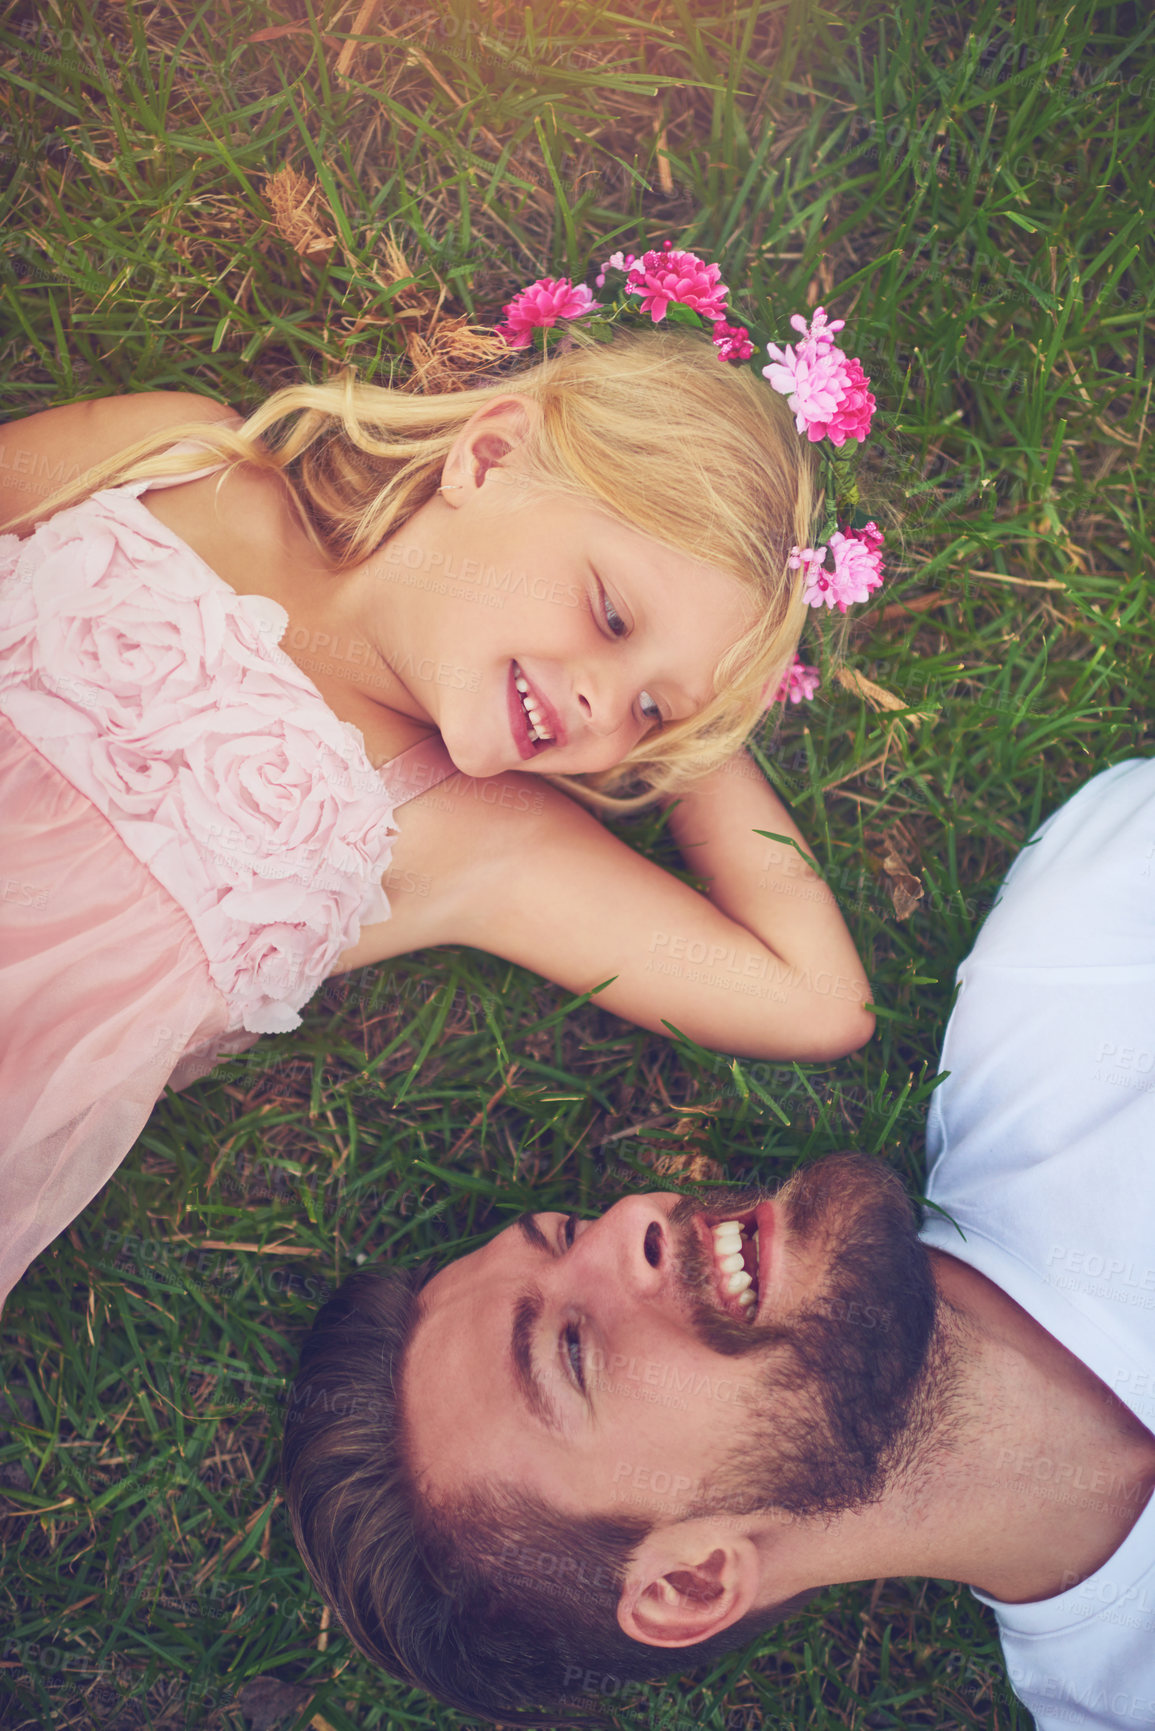 Buy stock photo Shot of a happy daughter and father lying on the ground looking at one another outside in nature